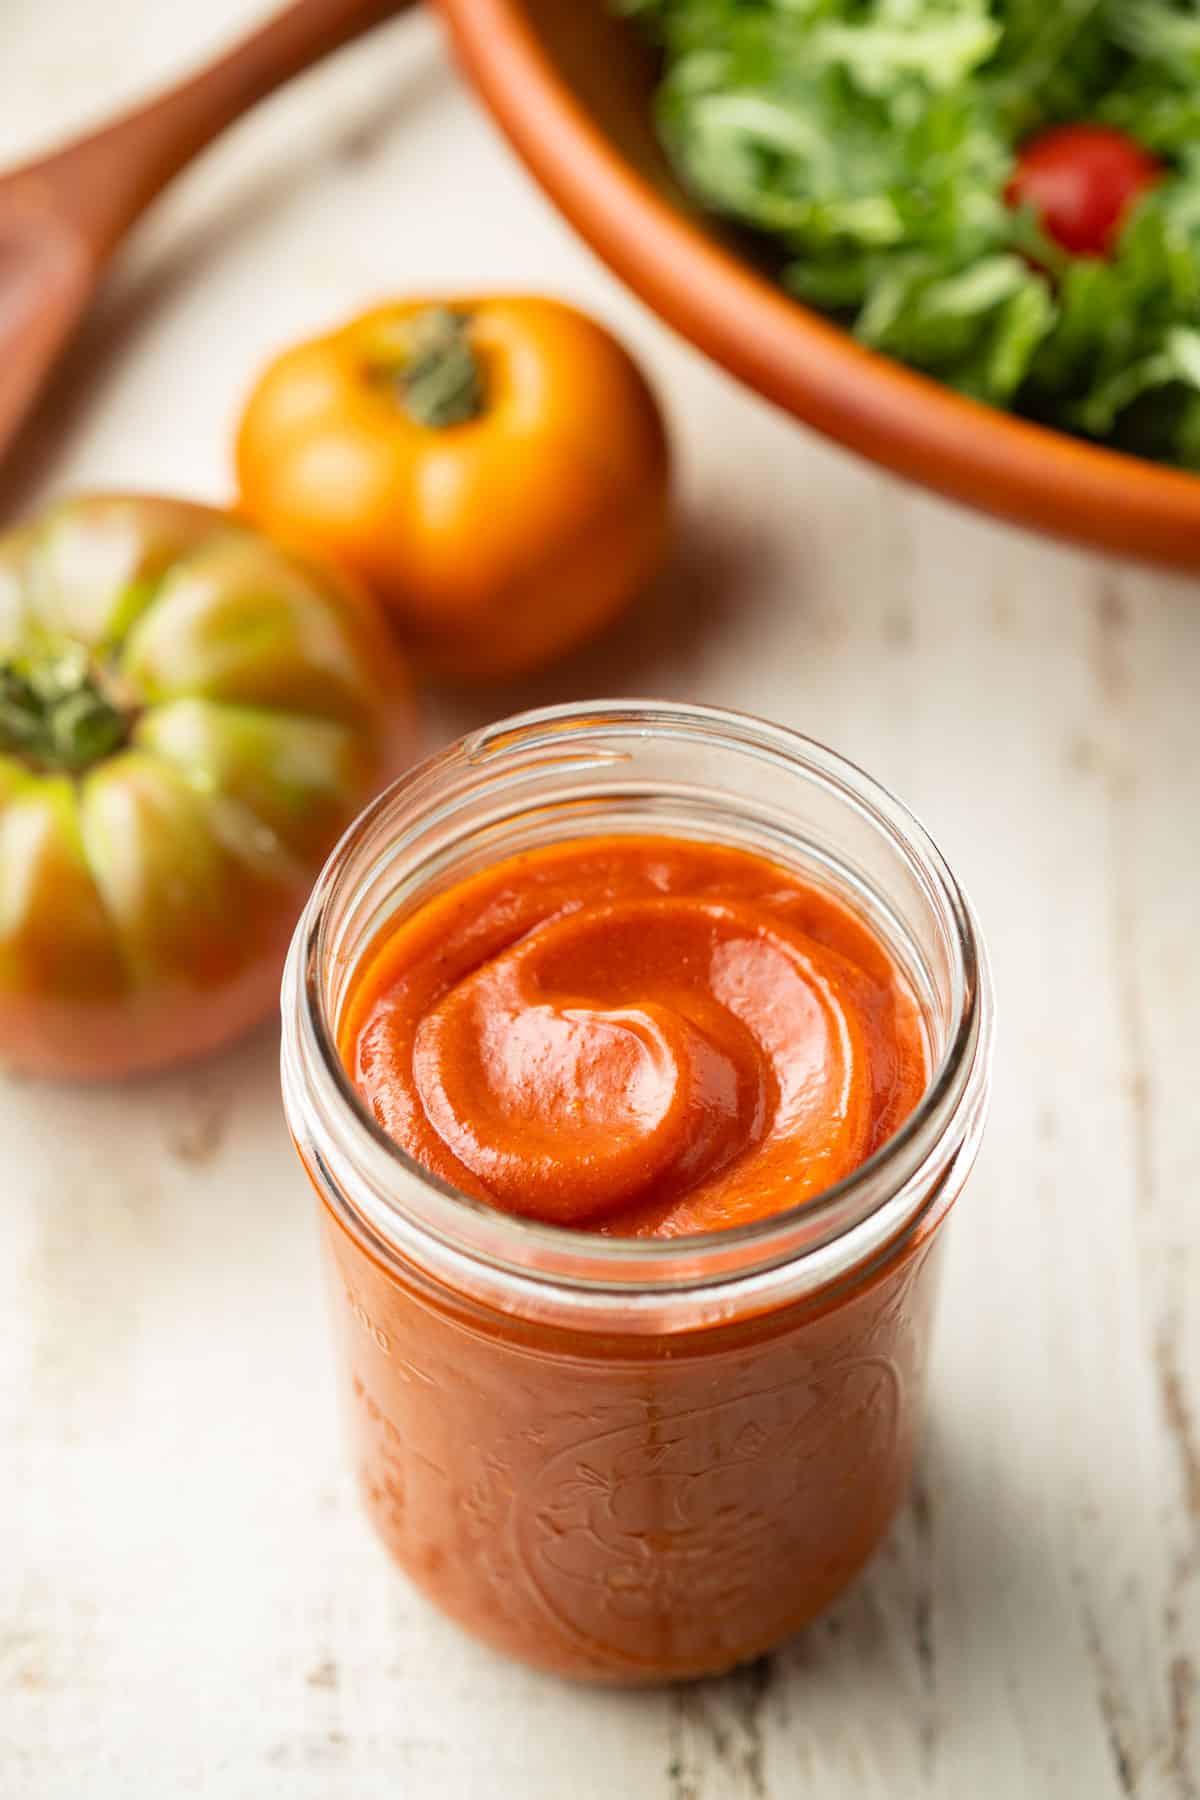 Jar of Vegan French Dressing with tomatoes and salad bowl in the background.